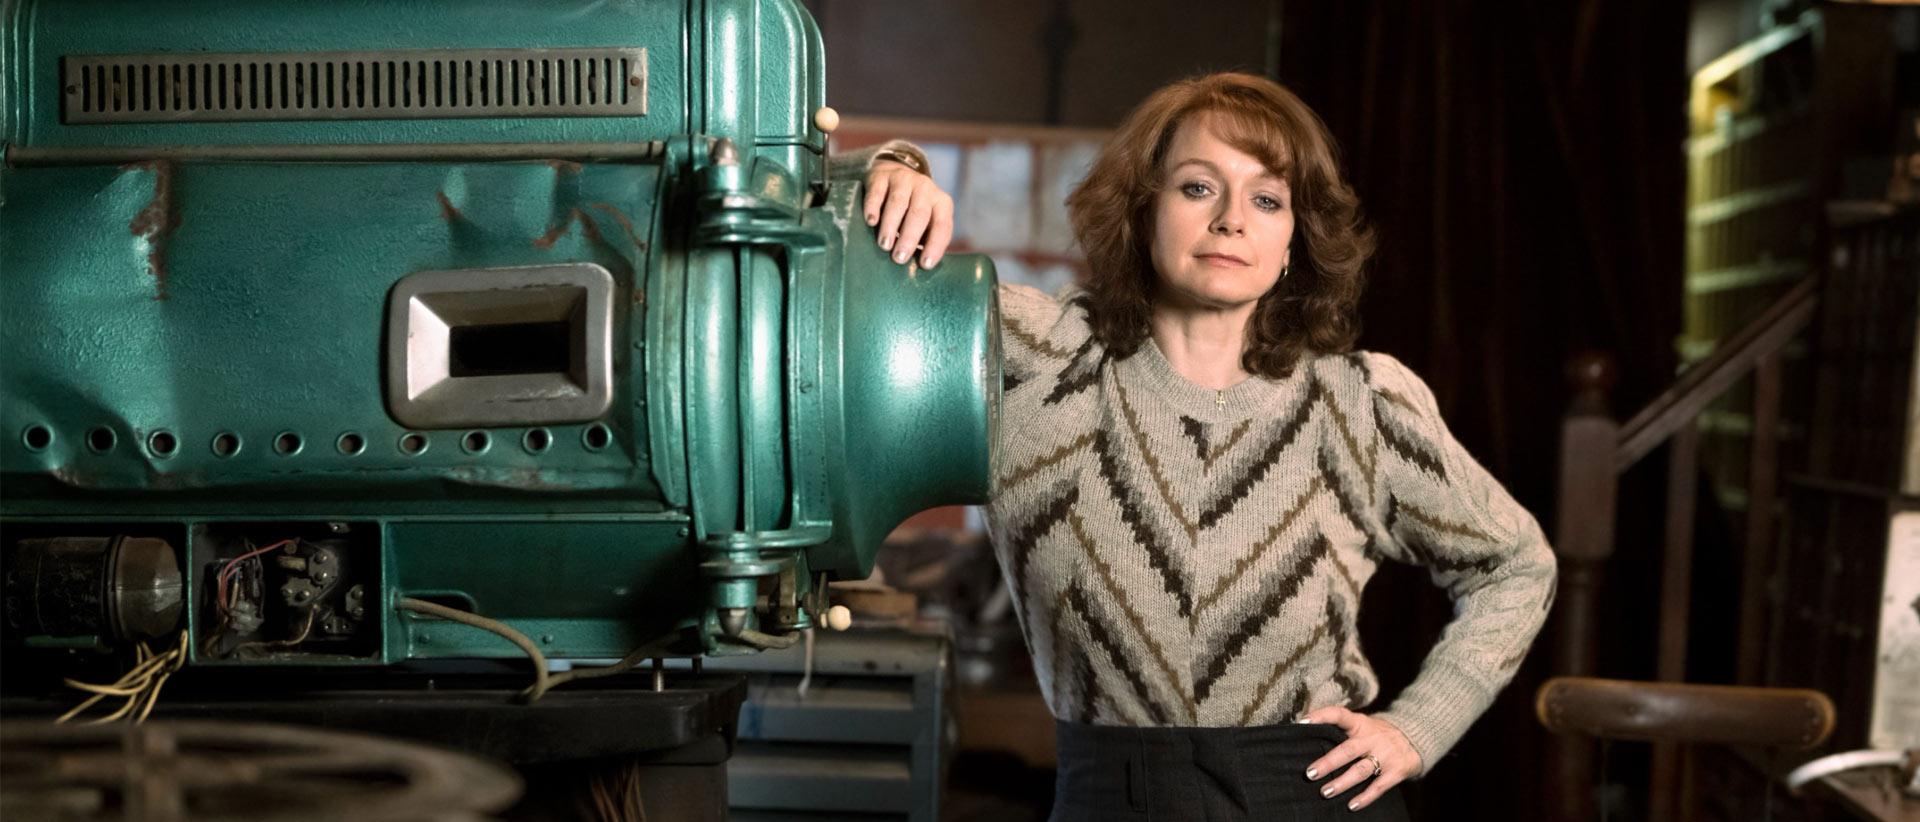 photo from save the cinema featuring samantha morton standing next to an old piece of machinery